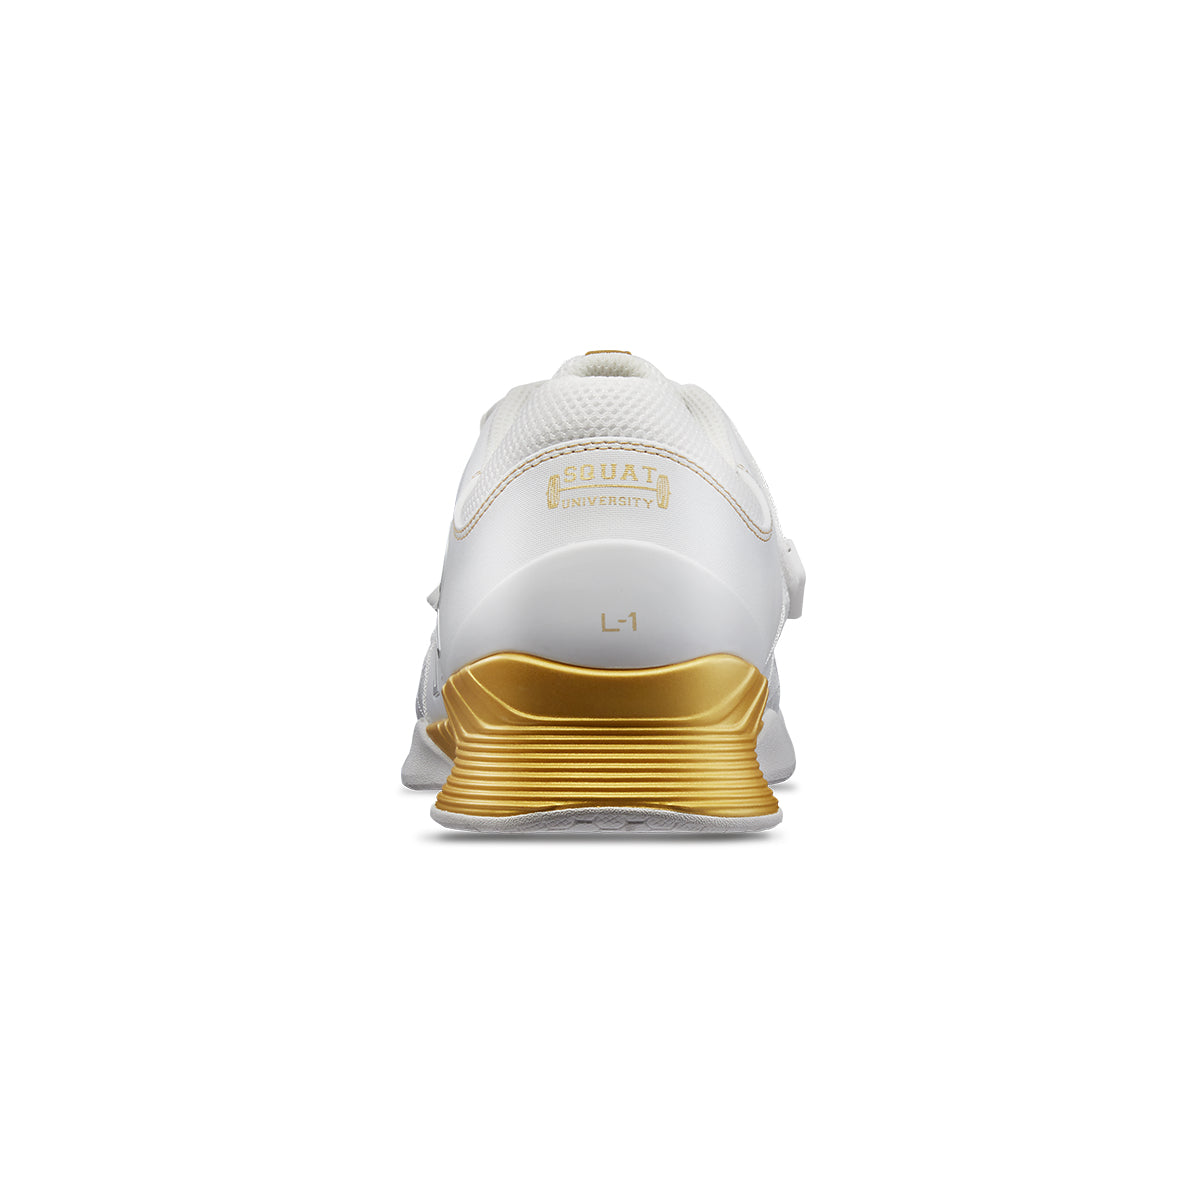 TYR L-1 Lifter Shoes (132 White/Gold - Limited Edition Squat University)